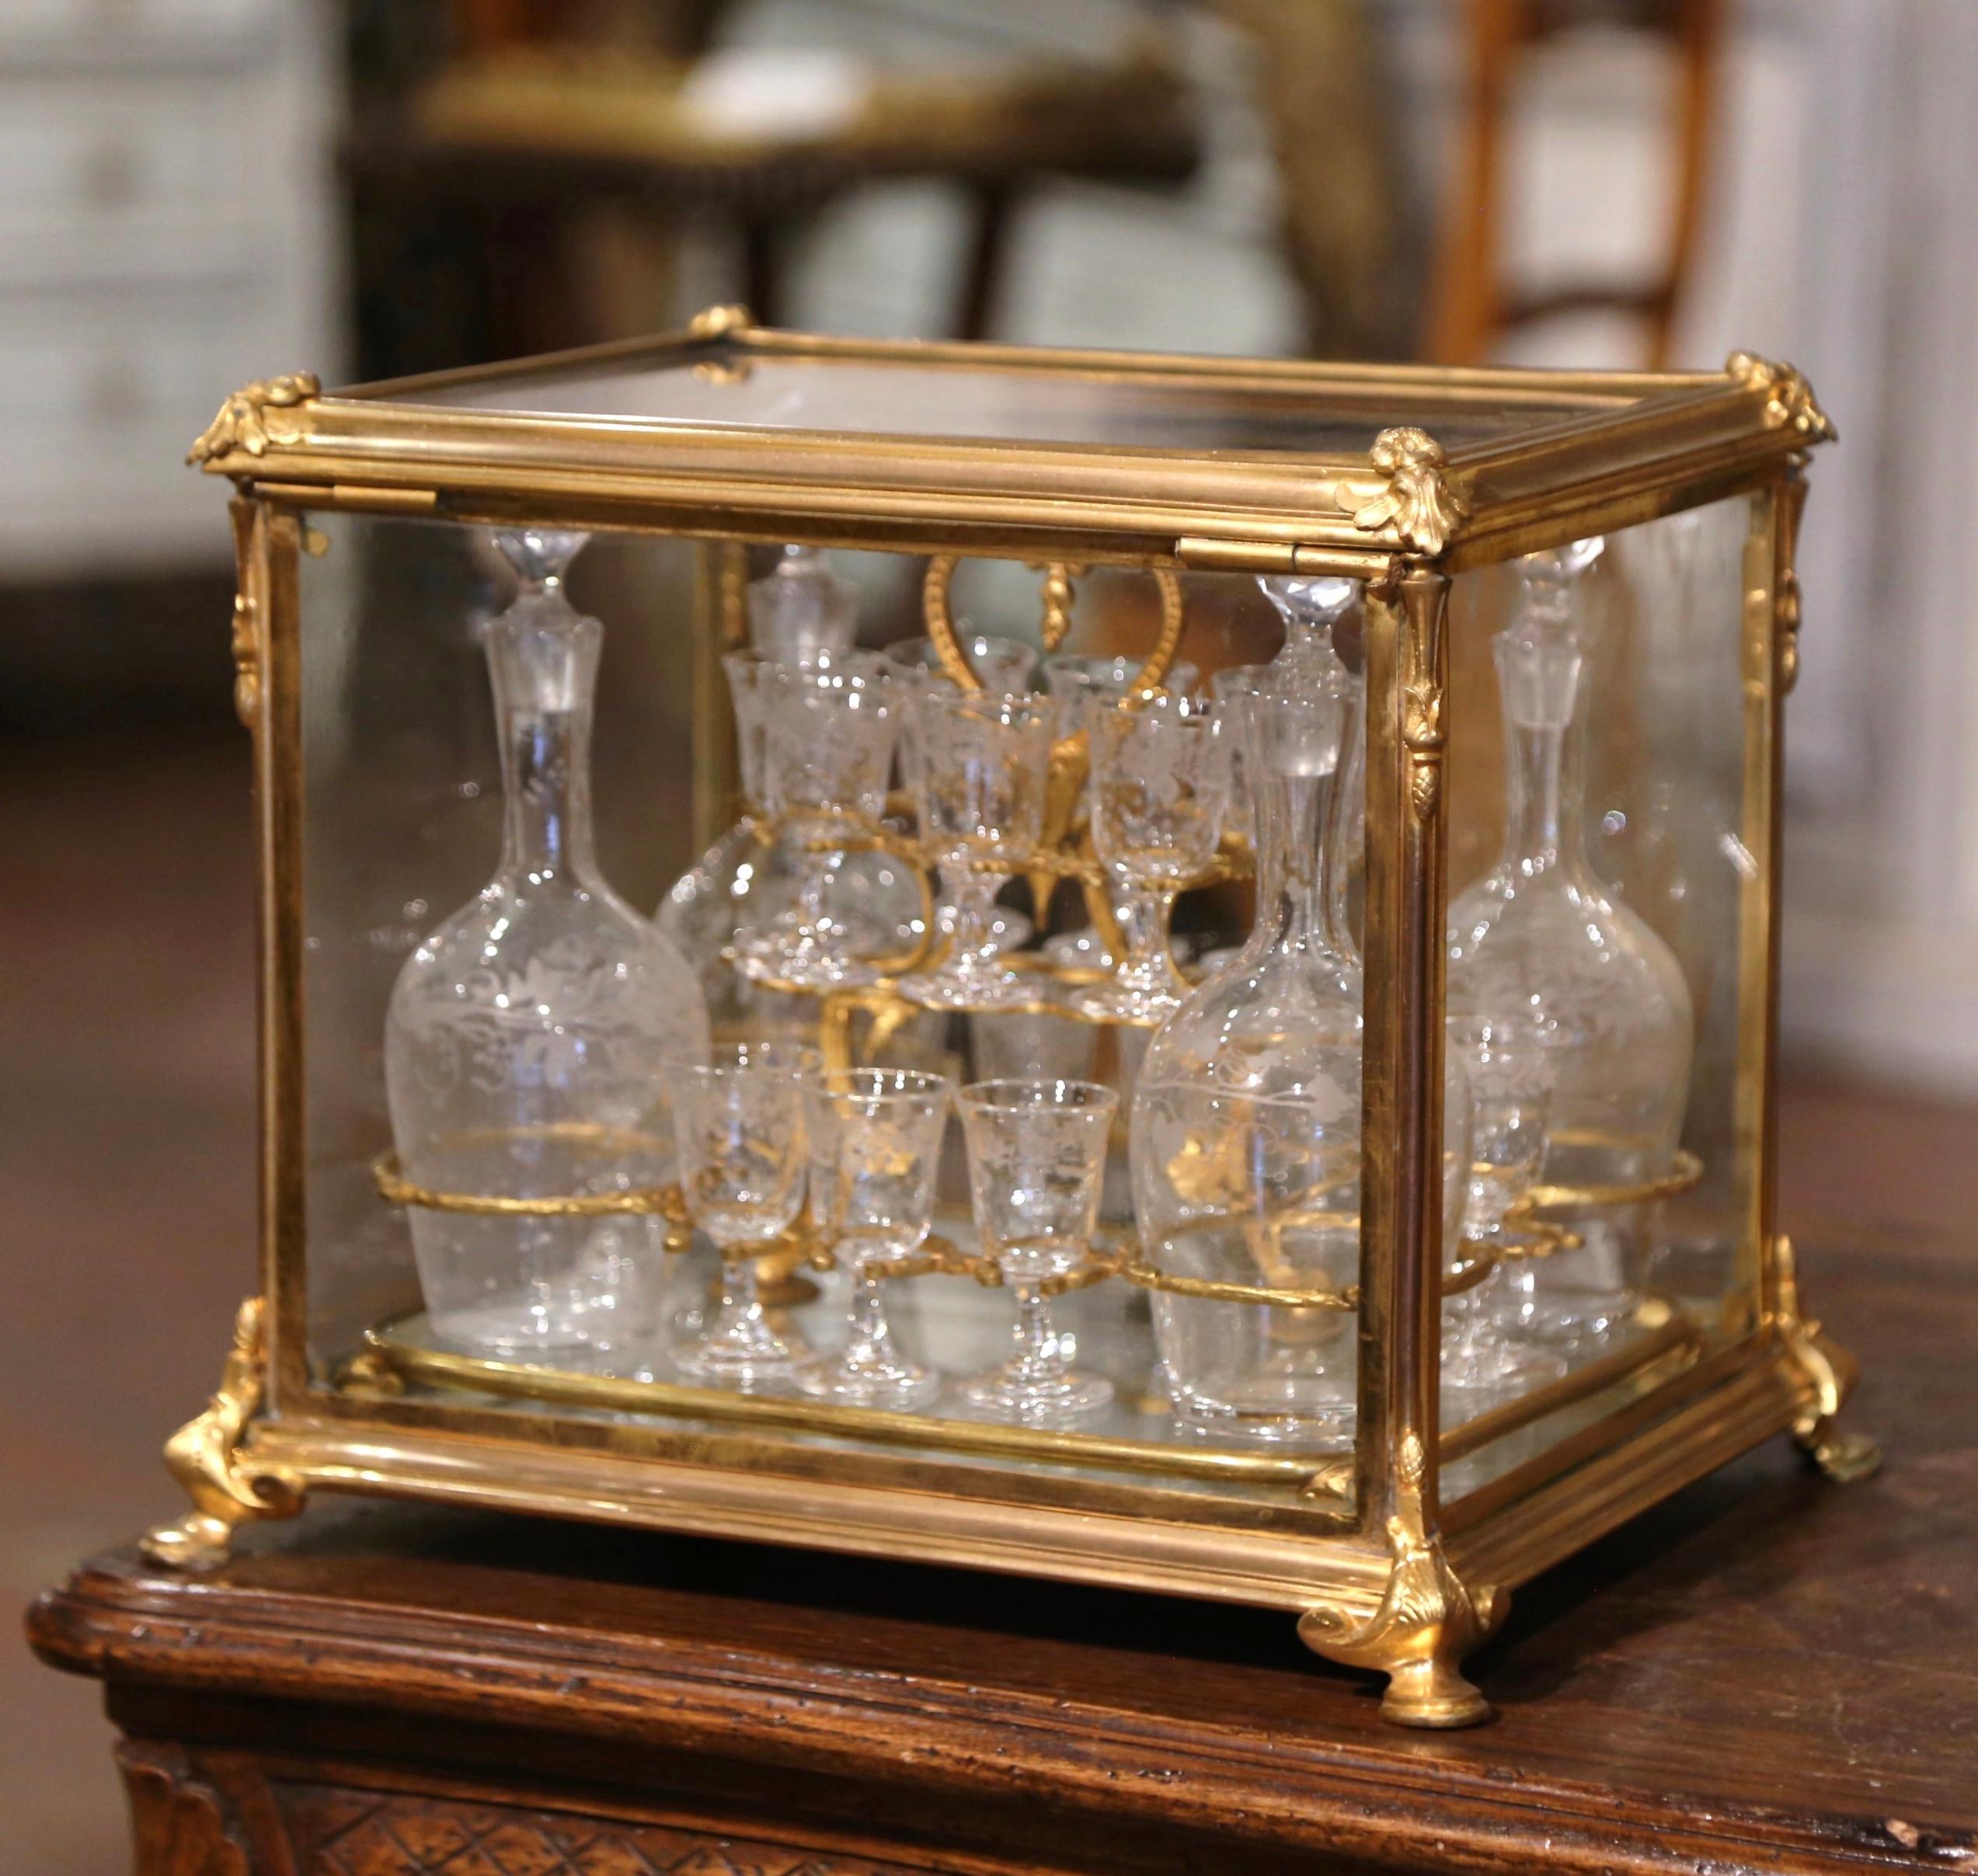 Create a bar area with this elegant antique cave à liqueur. Created in France circa 1870 and built of bronze with floral decor in each corner, the decorative liquor box stands on curved feet decorated with acanthus leaf motifs. The bar essential is